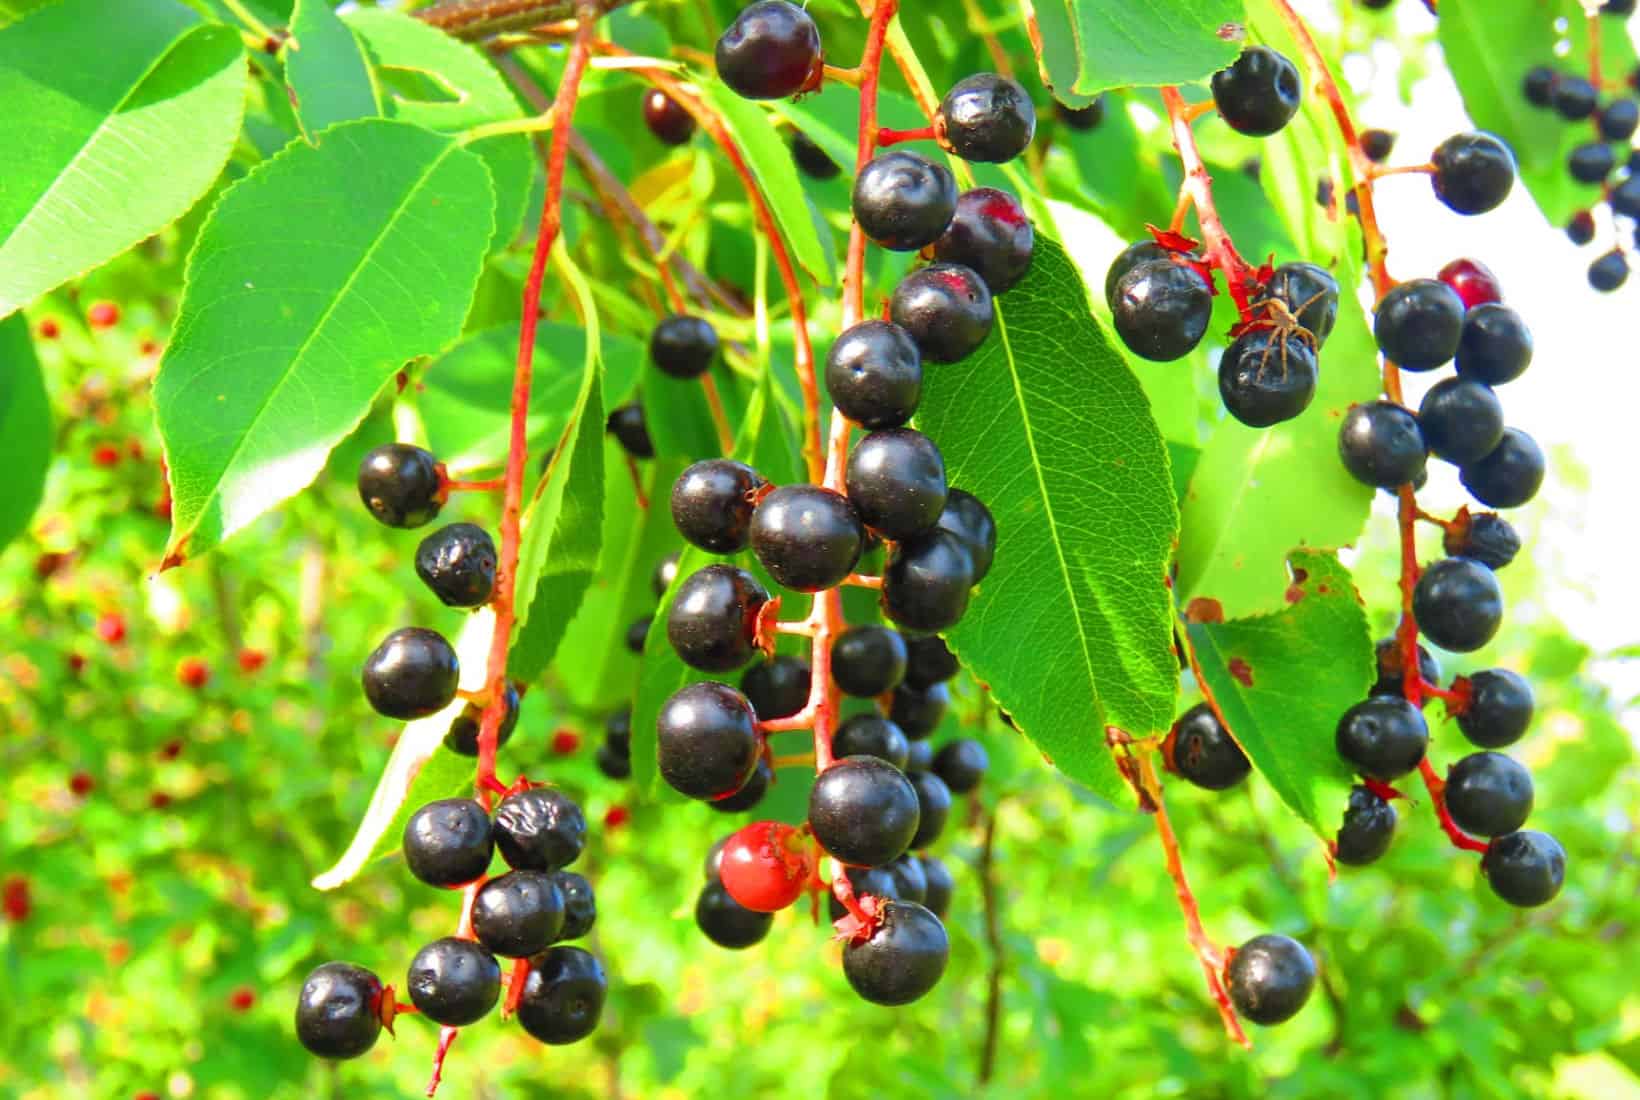 A tree with dark-colored, edible hackberry berries hanging from it.